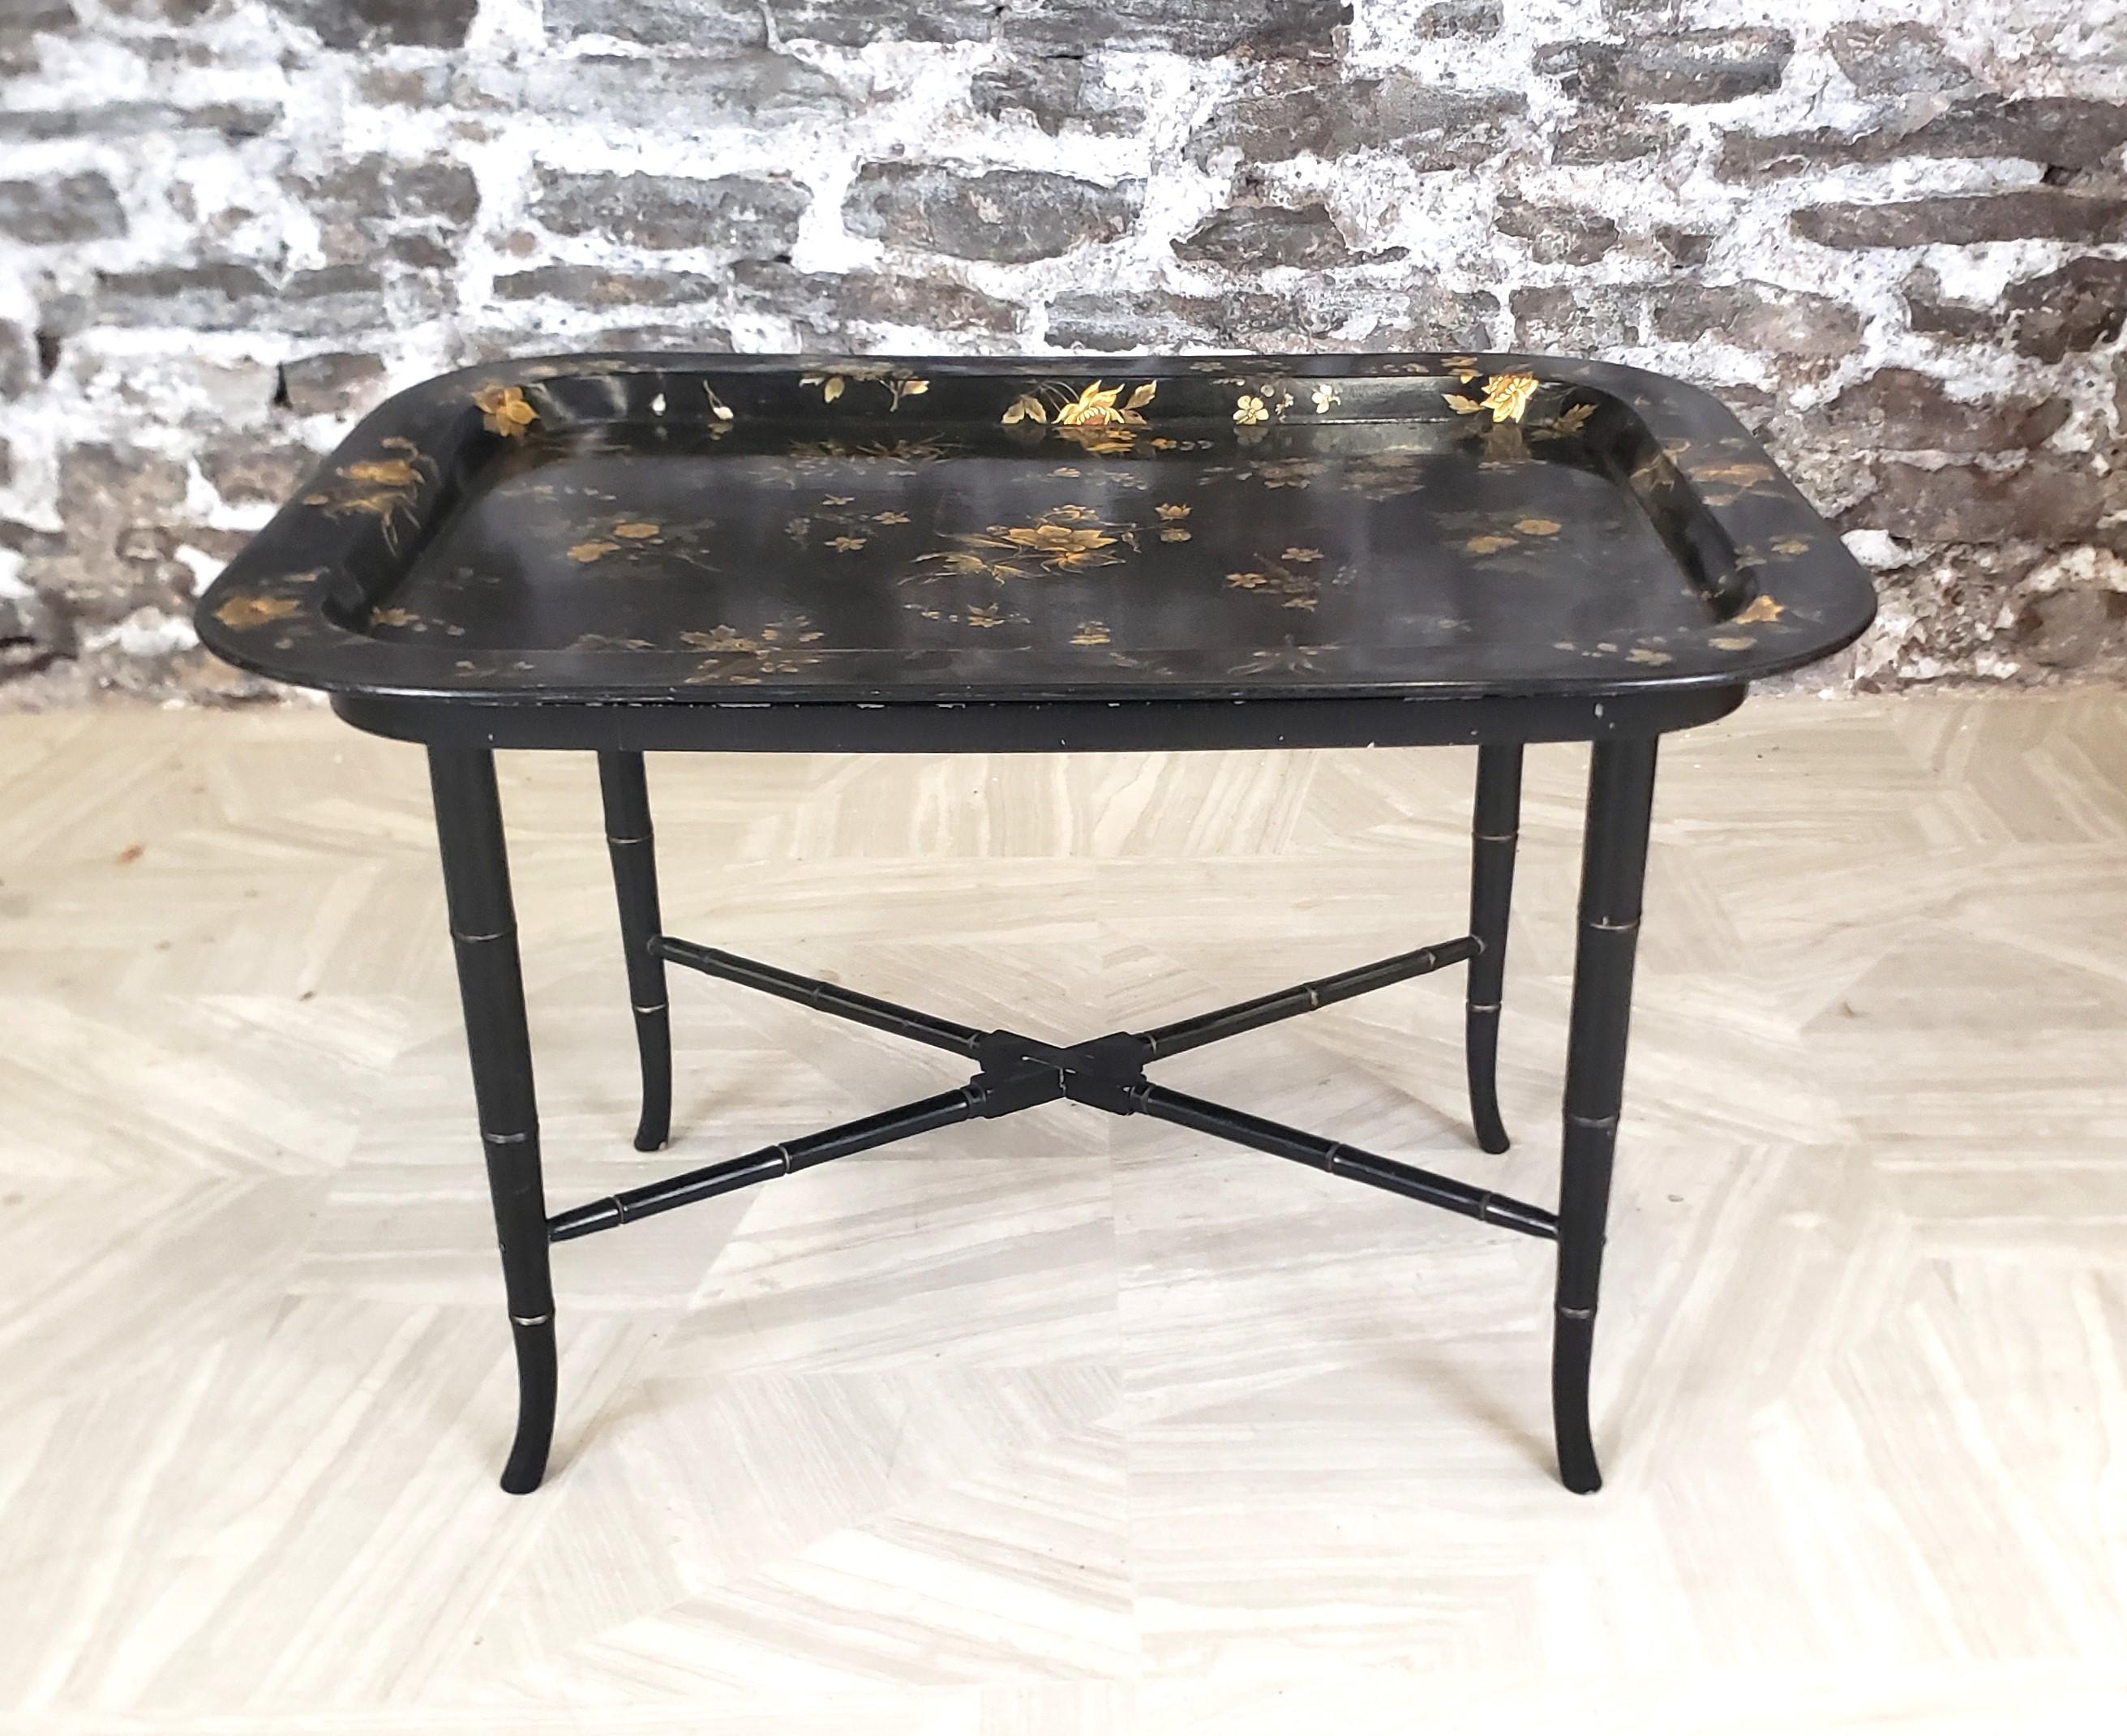 19th Century Antique English Paper Mache Tray Table with Faux Bamboo Legs & Floral Decoration For Sale